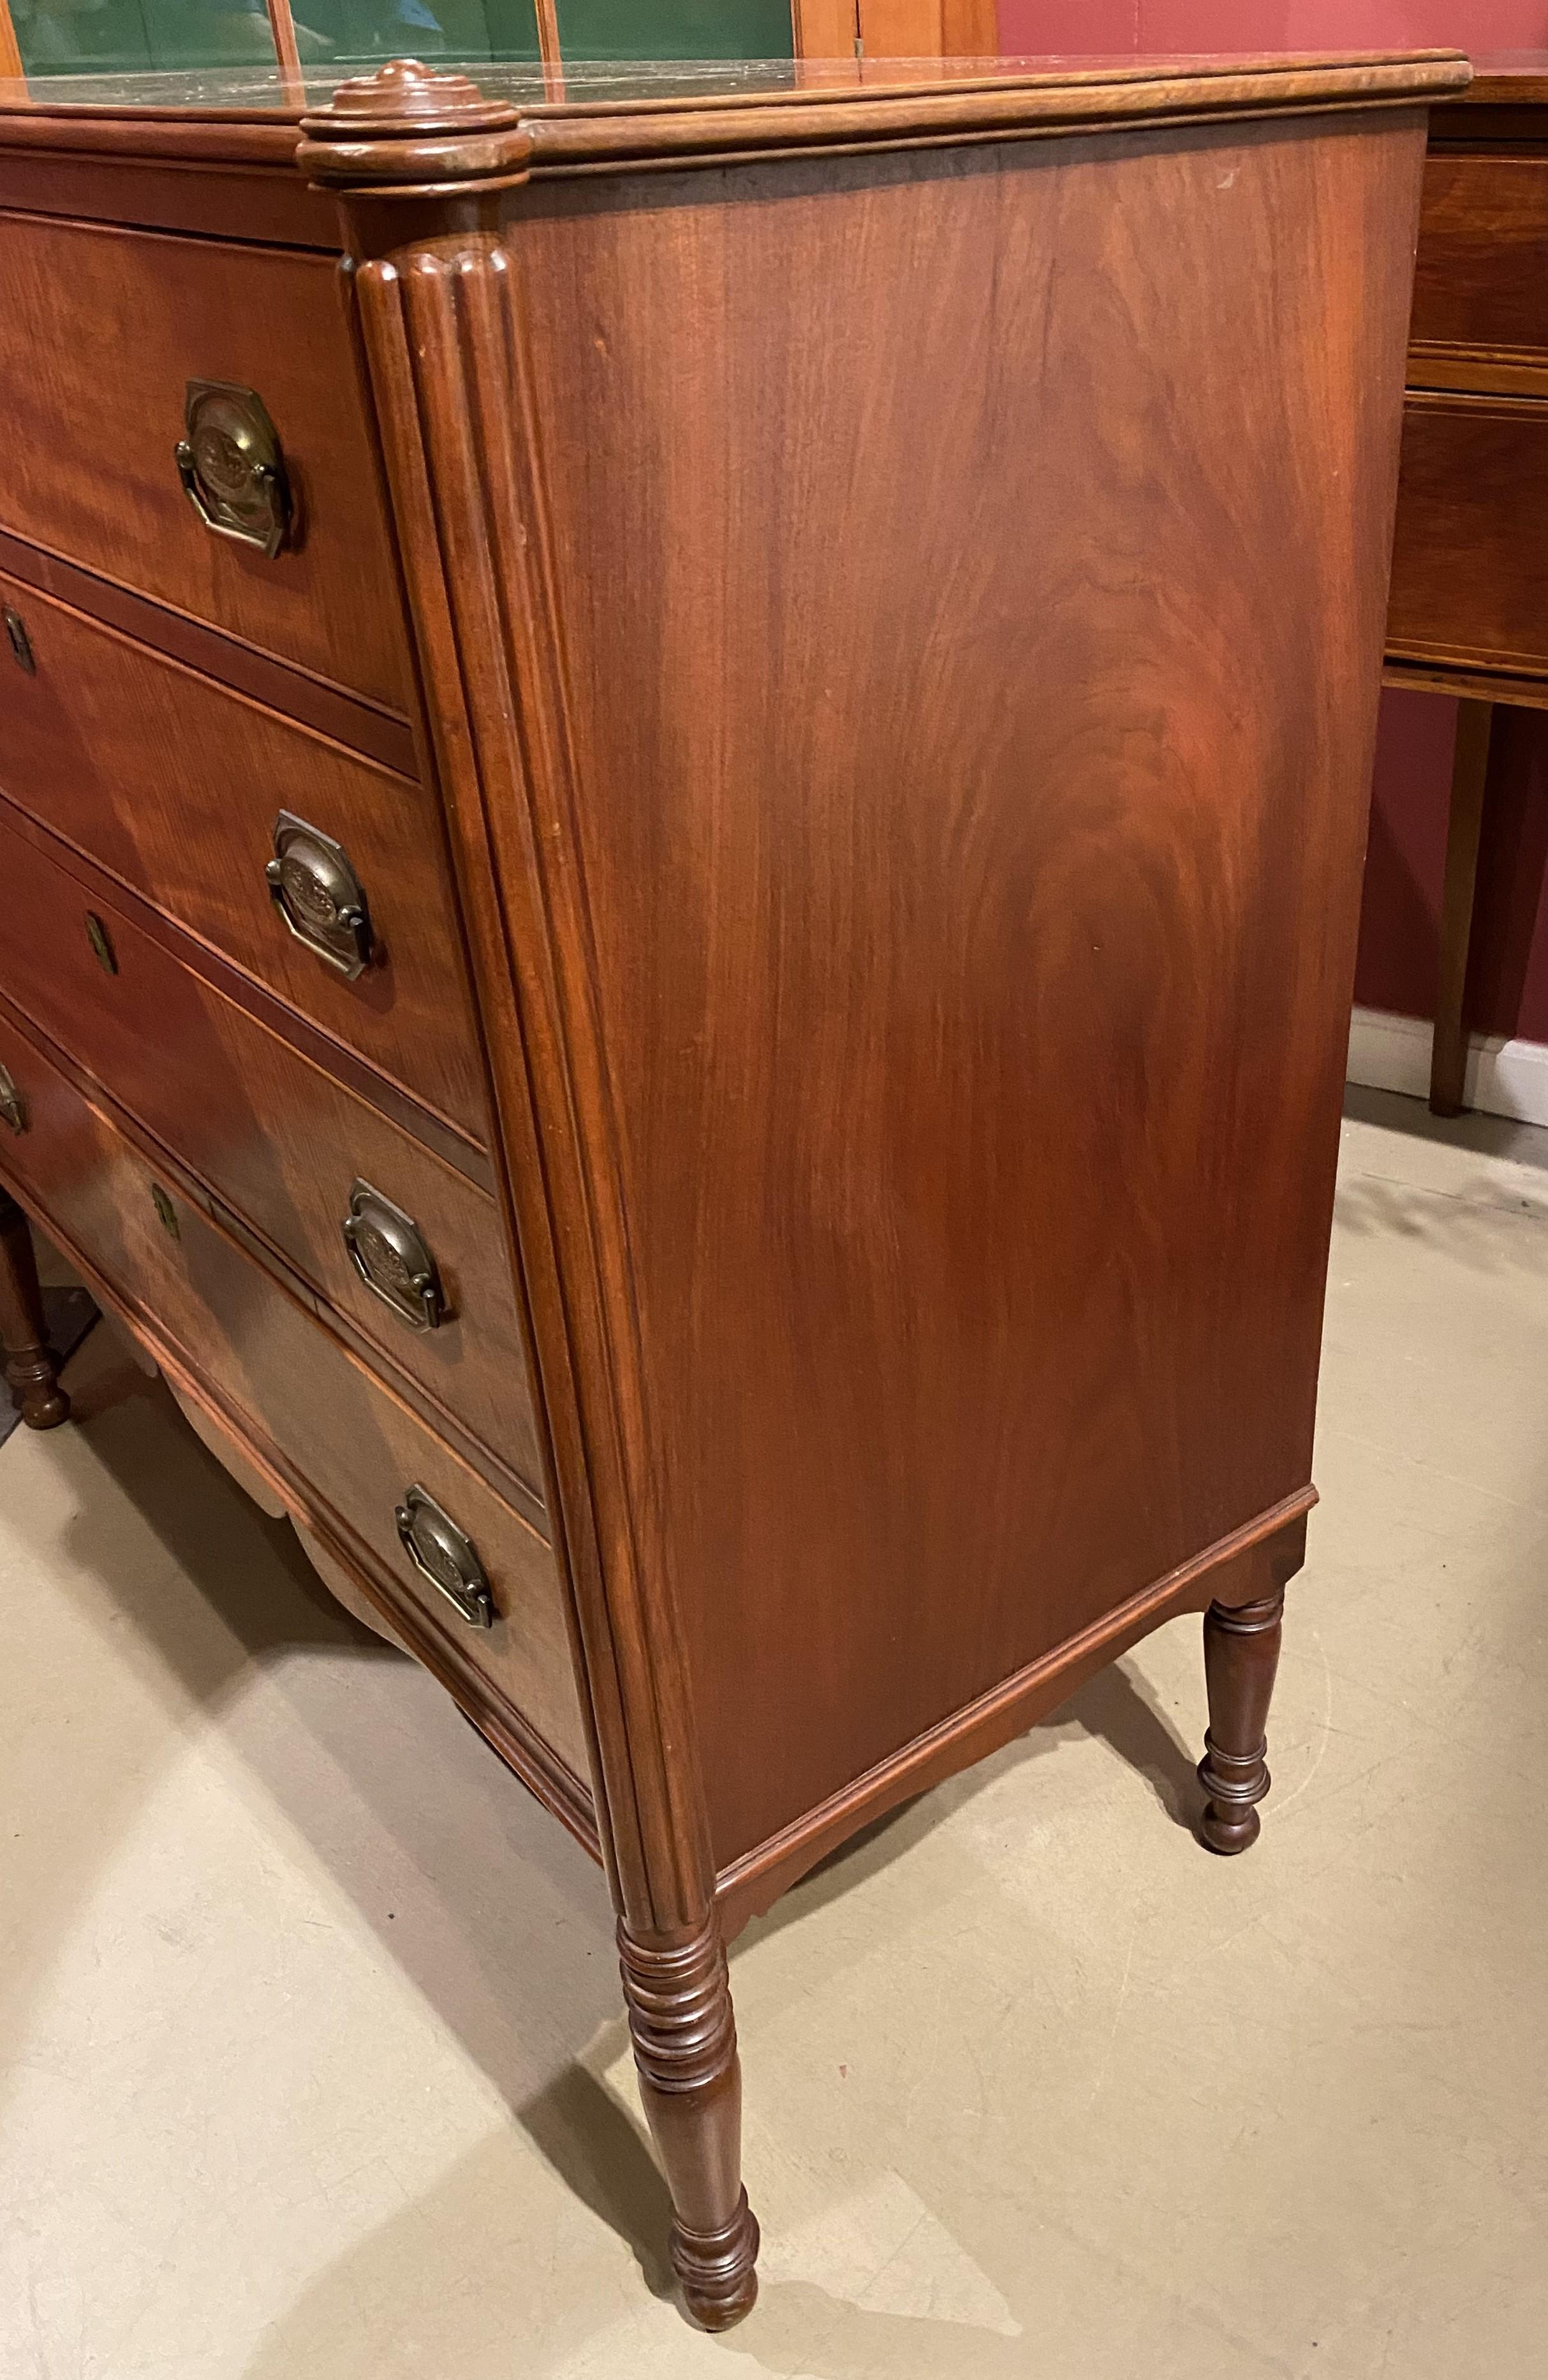 Sheraton Federal Period Cherry, Mahogany & Tiger Maple Chest of Drawers c.1810 In Good Condition For Sale In Milford, NH